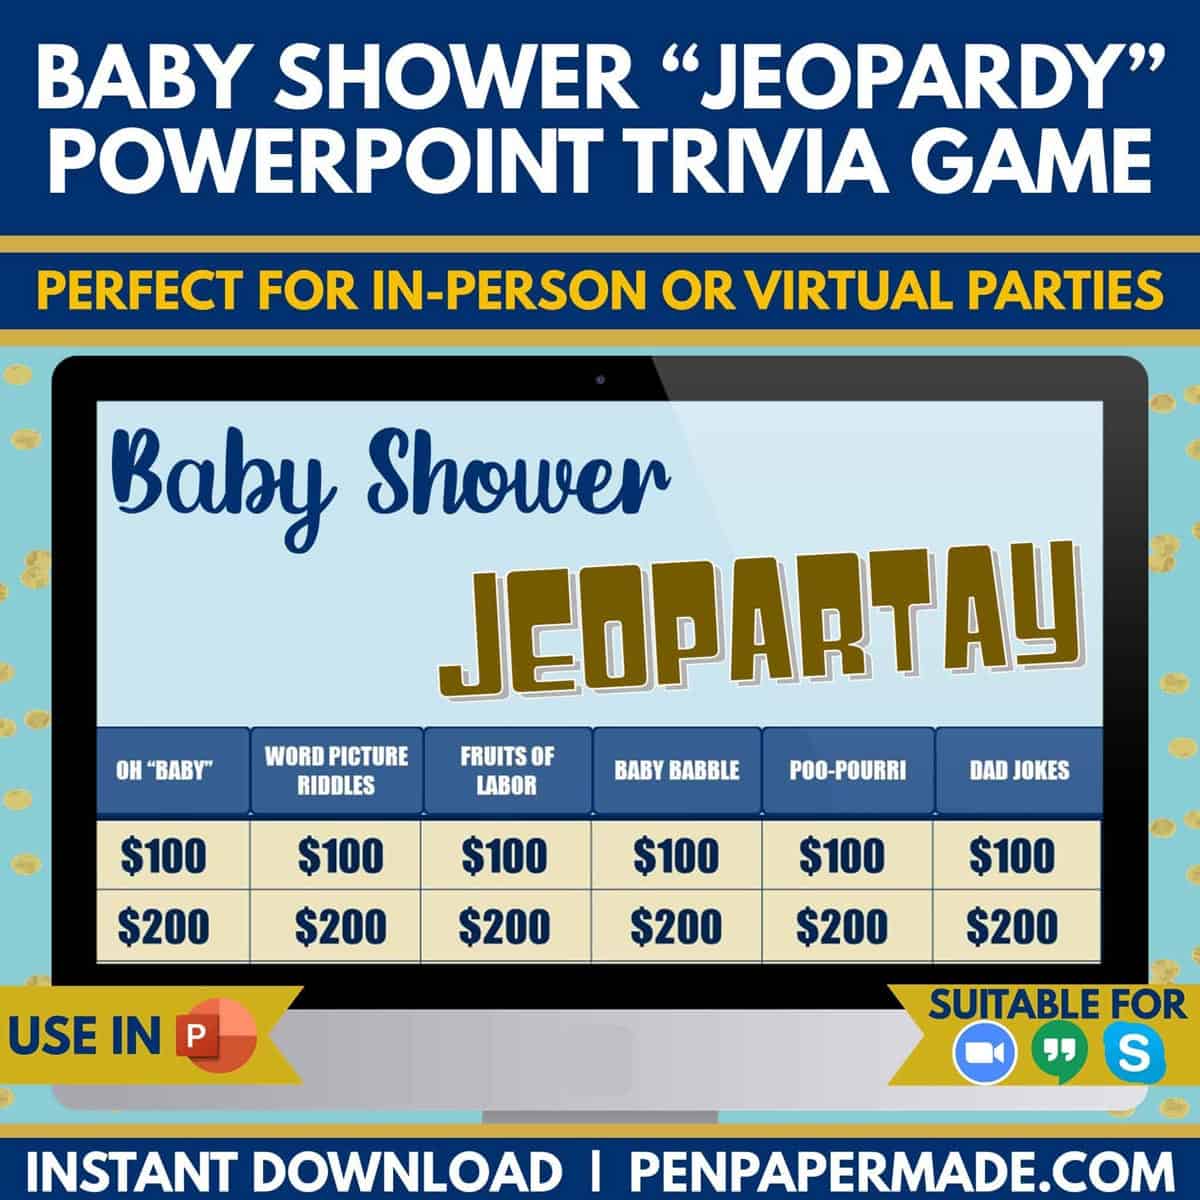 blue baby shower jeopardy powerpoint title and game categories.